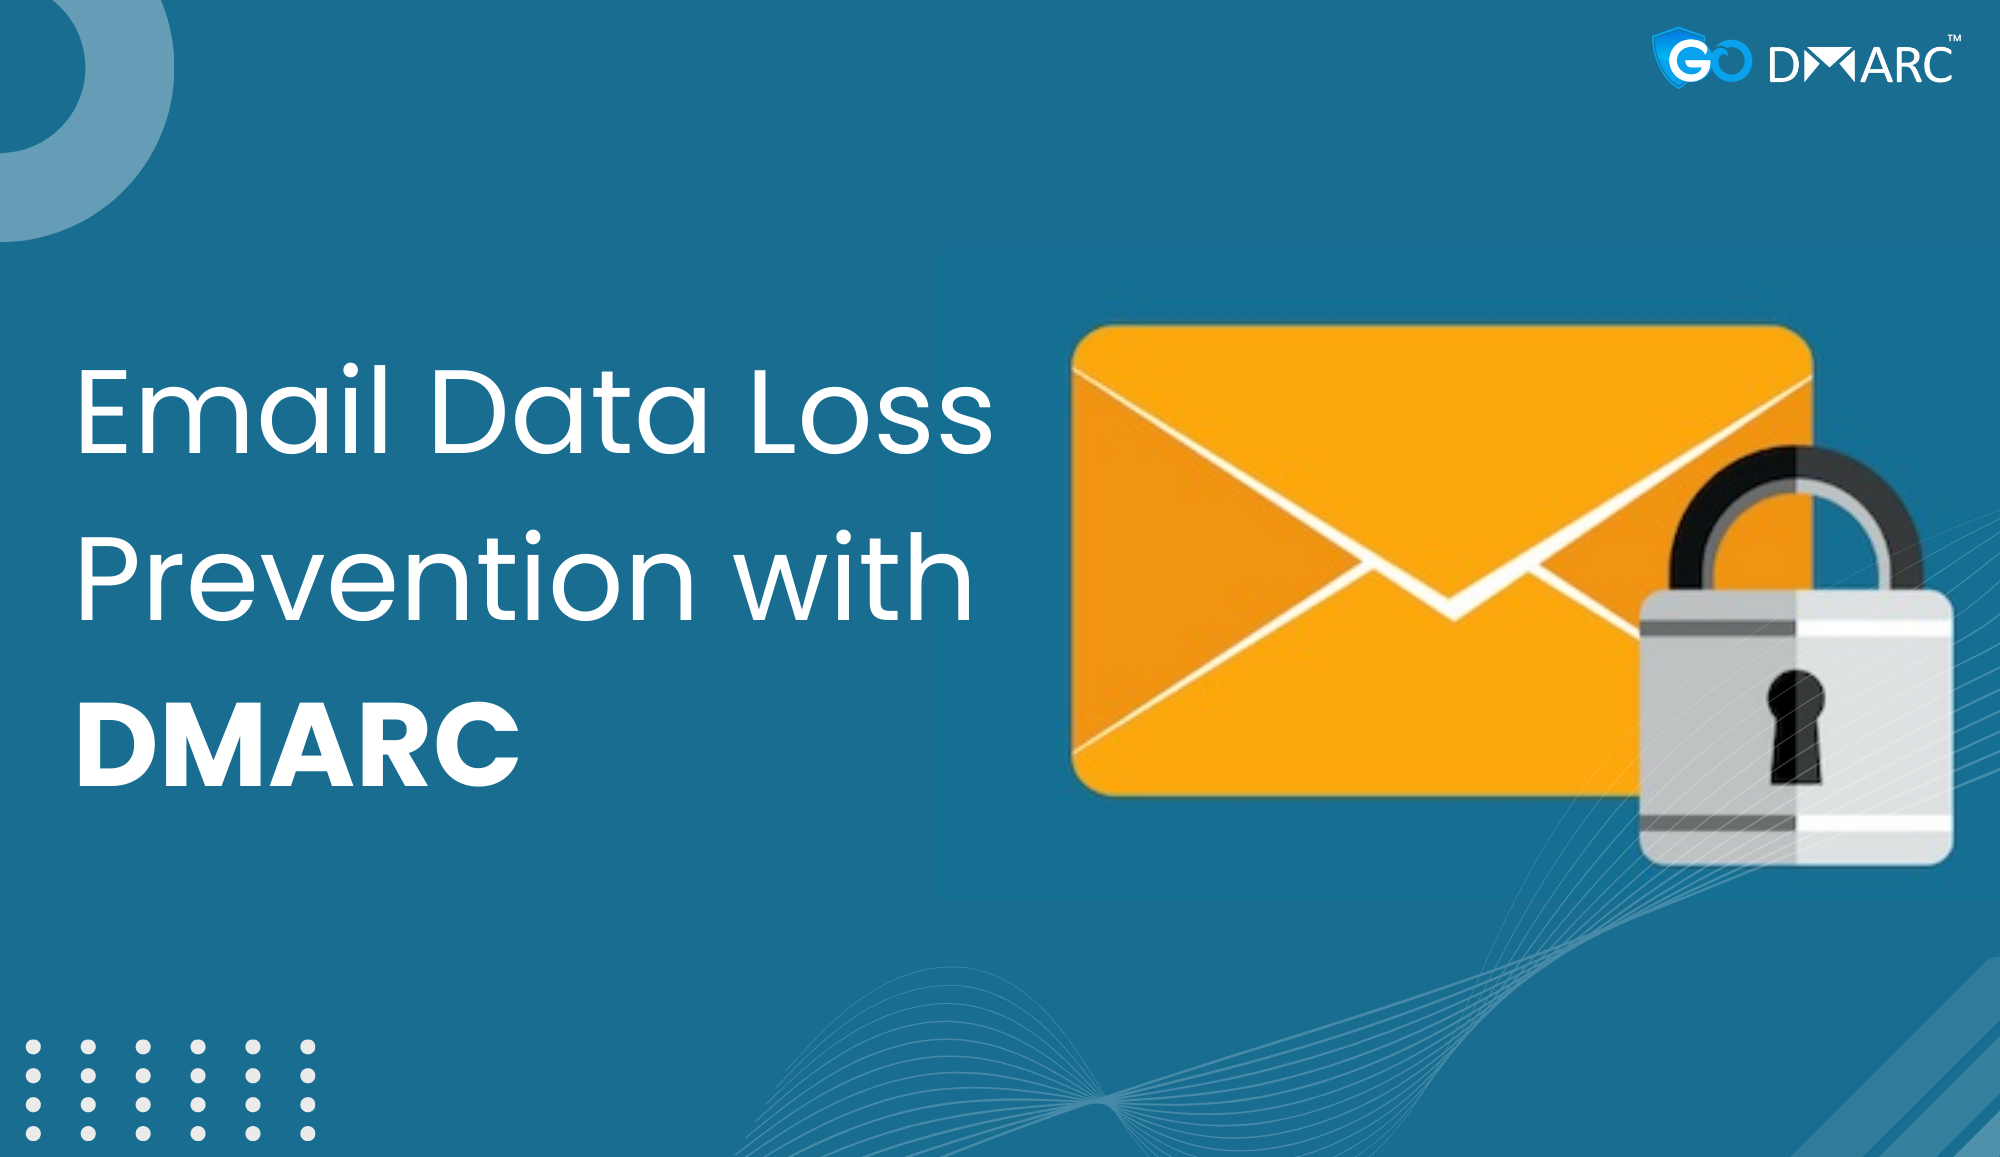 email data loss prevention with dmarc